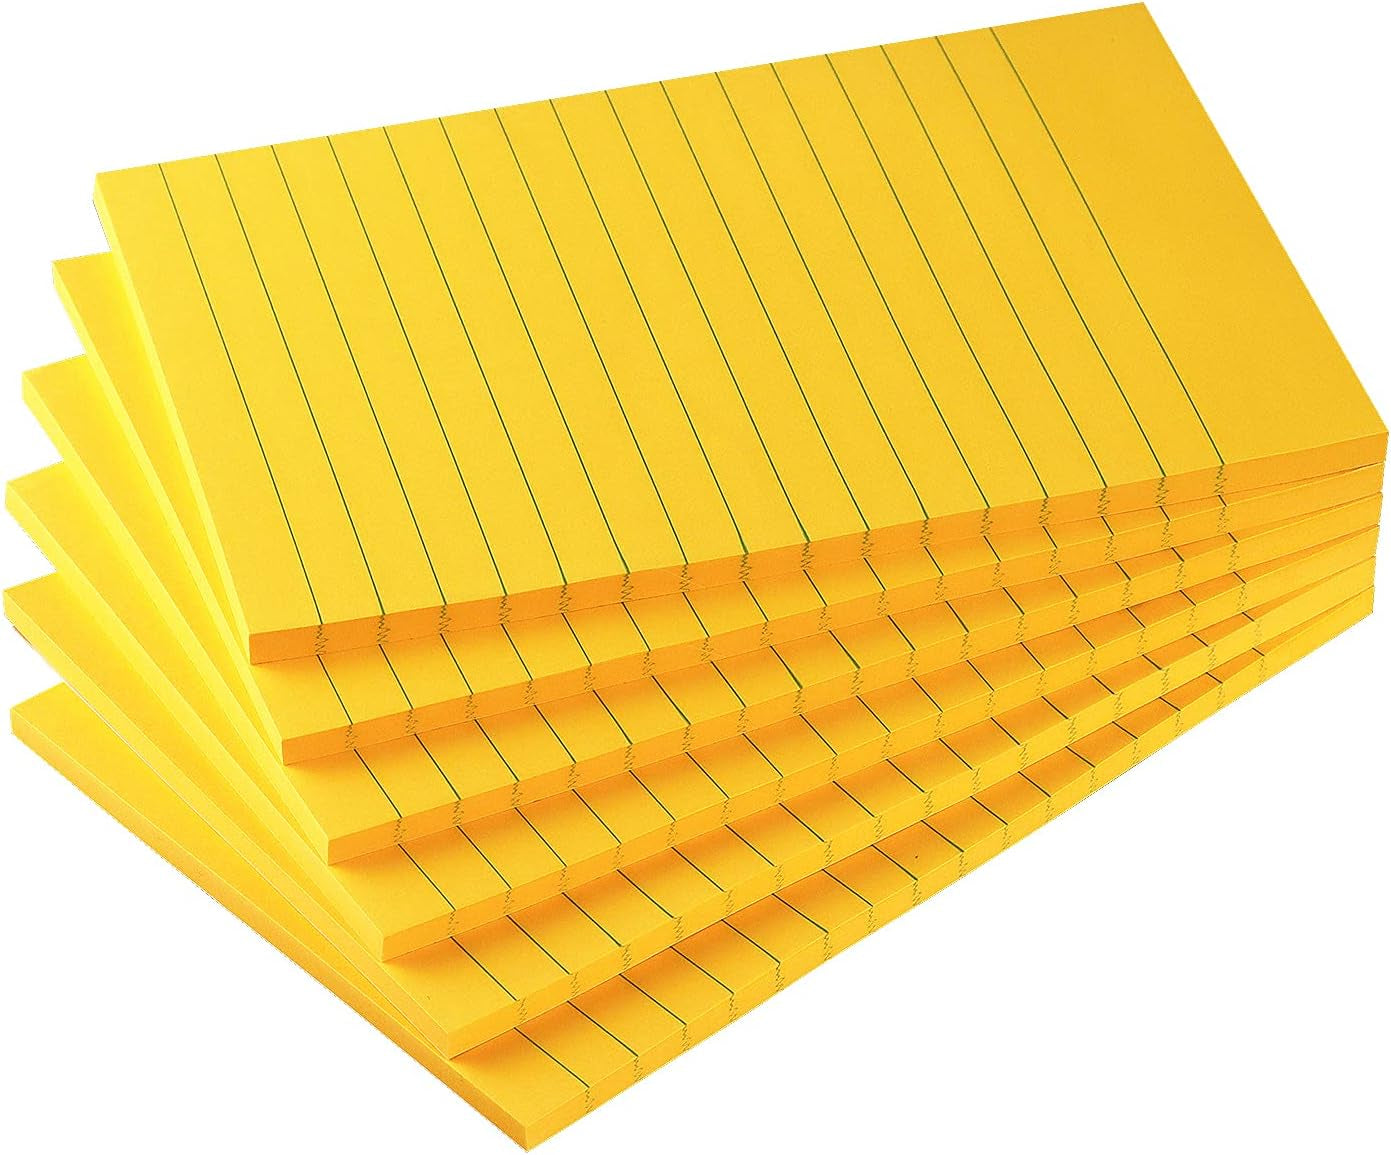 6 Pads Lined Sticky Notes with Lines 4X6 Self-Stick Notes Bright Color Sticky Notes, 45 Sheets/Pad (Yellow)